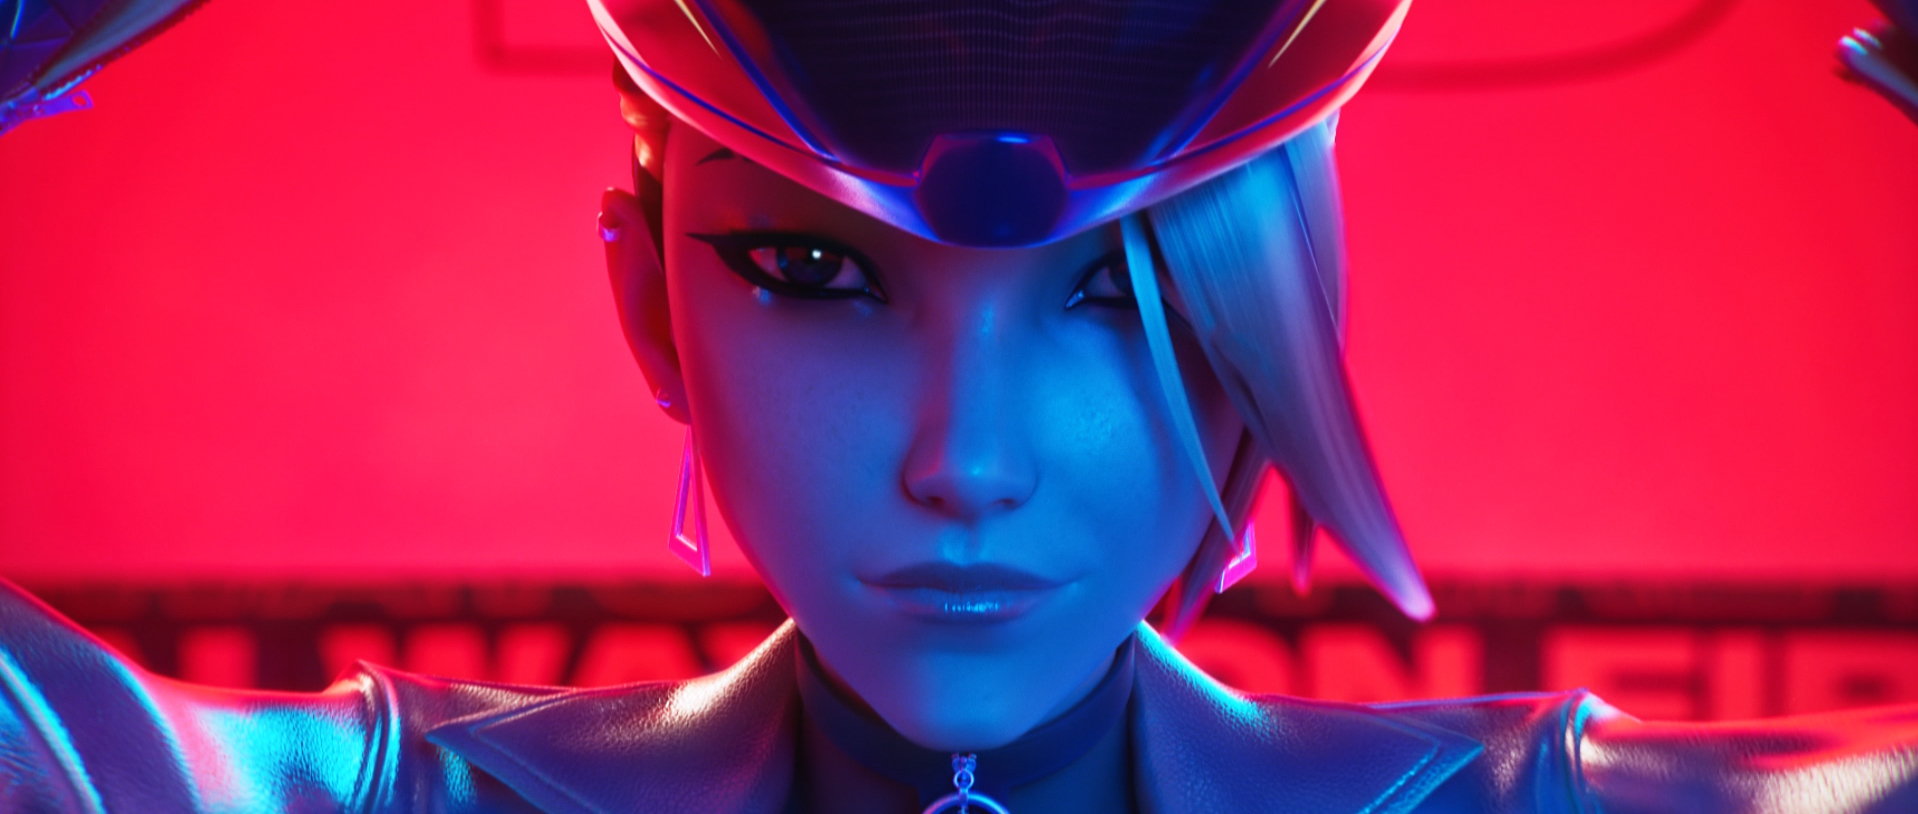 Axis Create Visual Spectacle for latest Music Video from K/DA | Animation UK